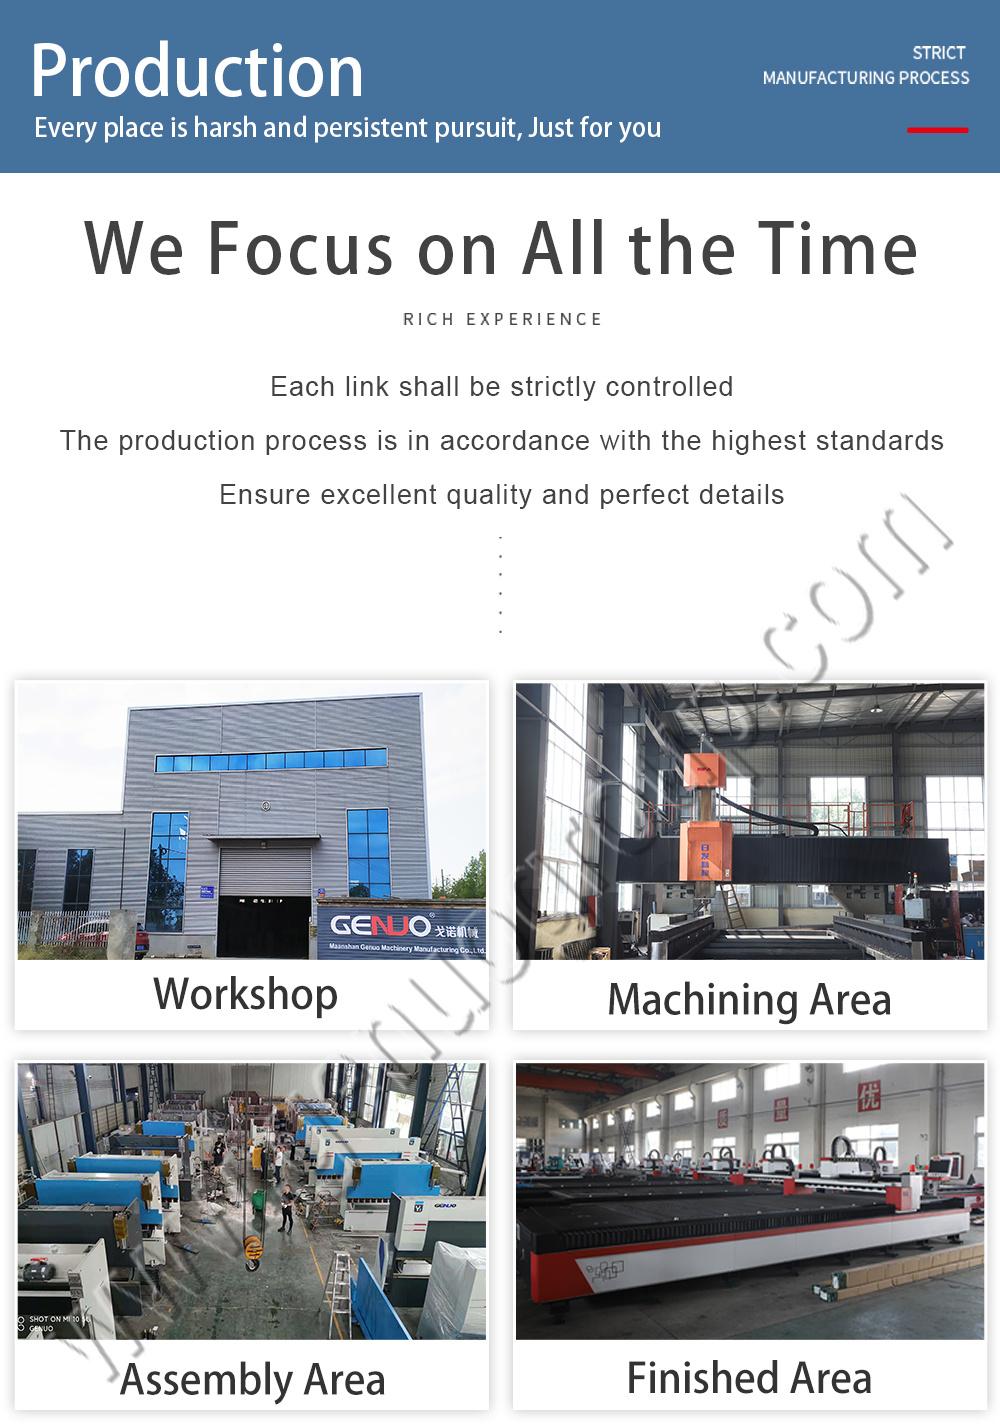 New and Hot Selling Product Nc Hydraulic Press Brake